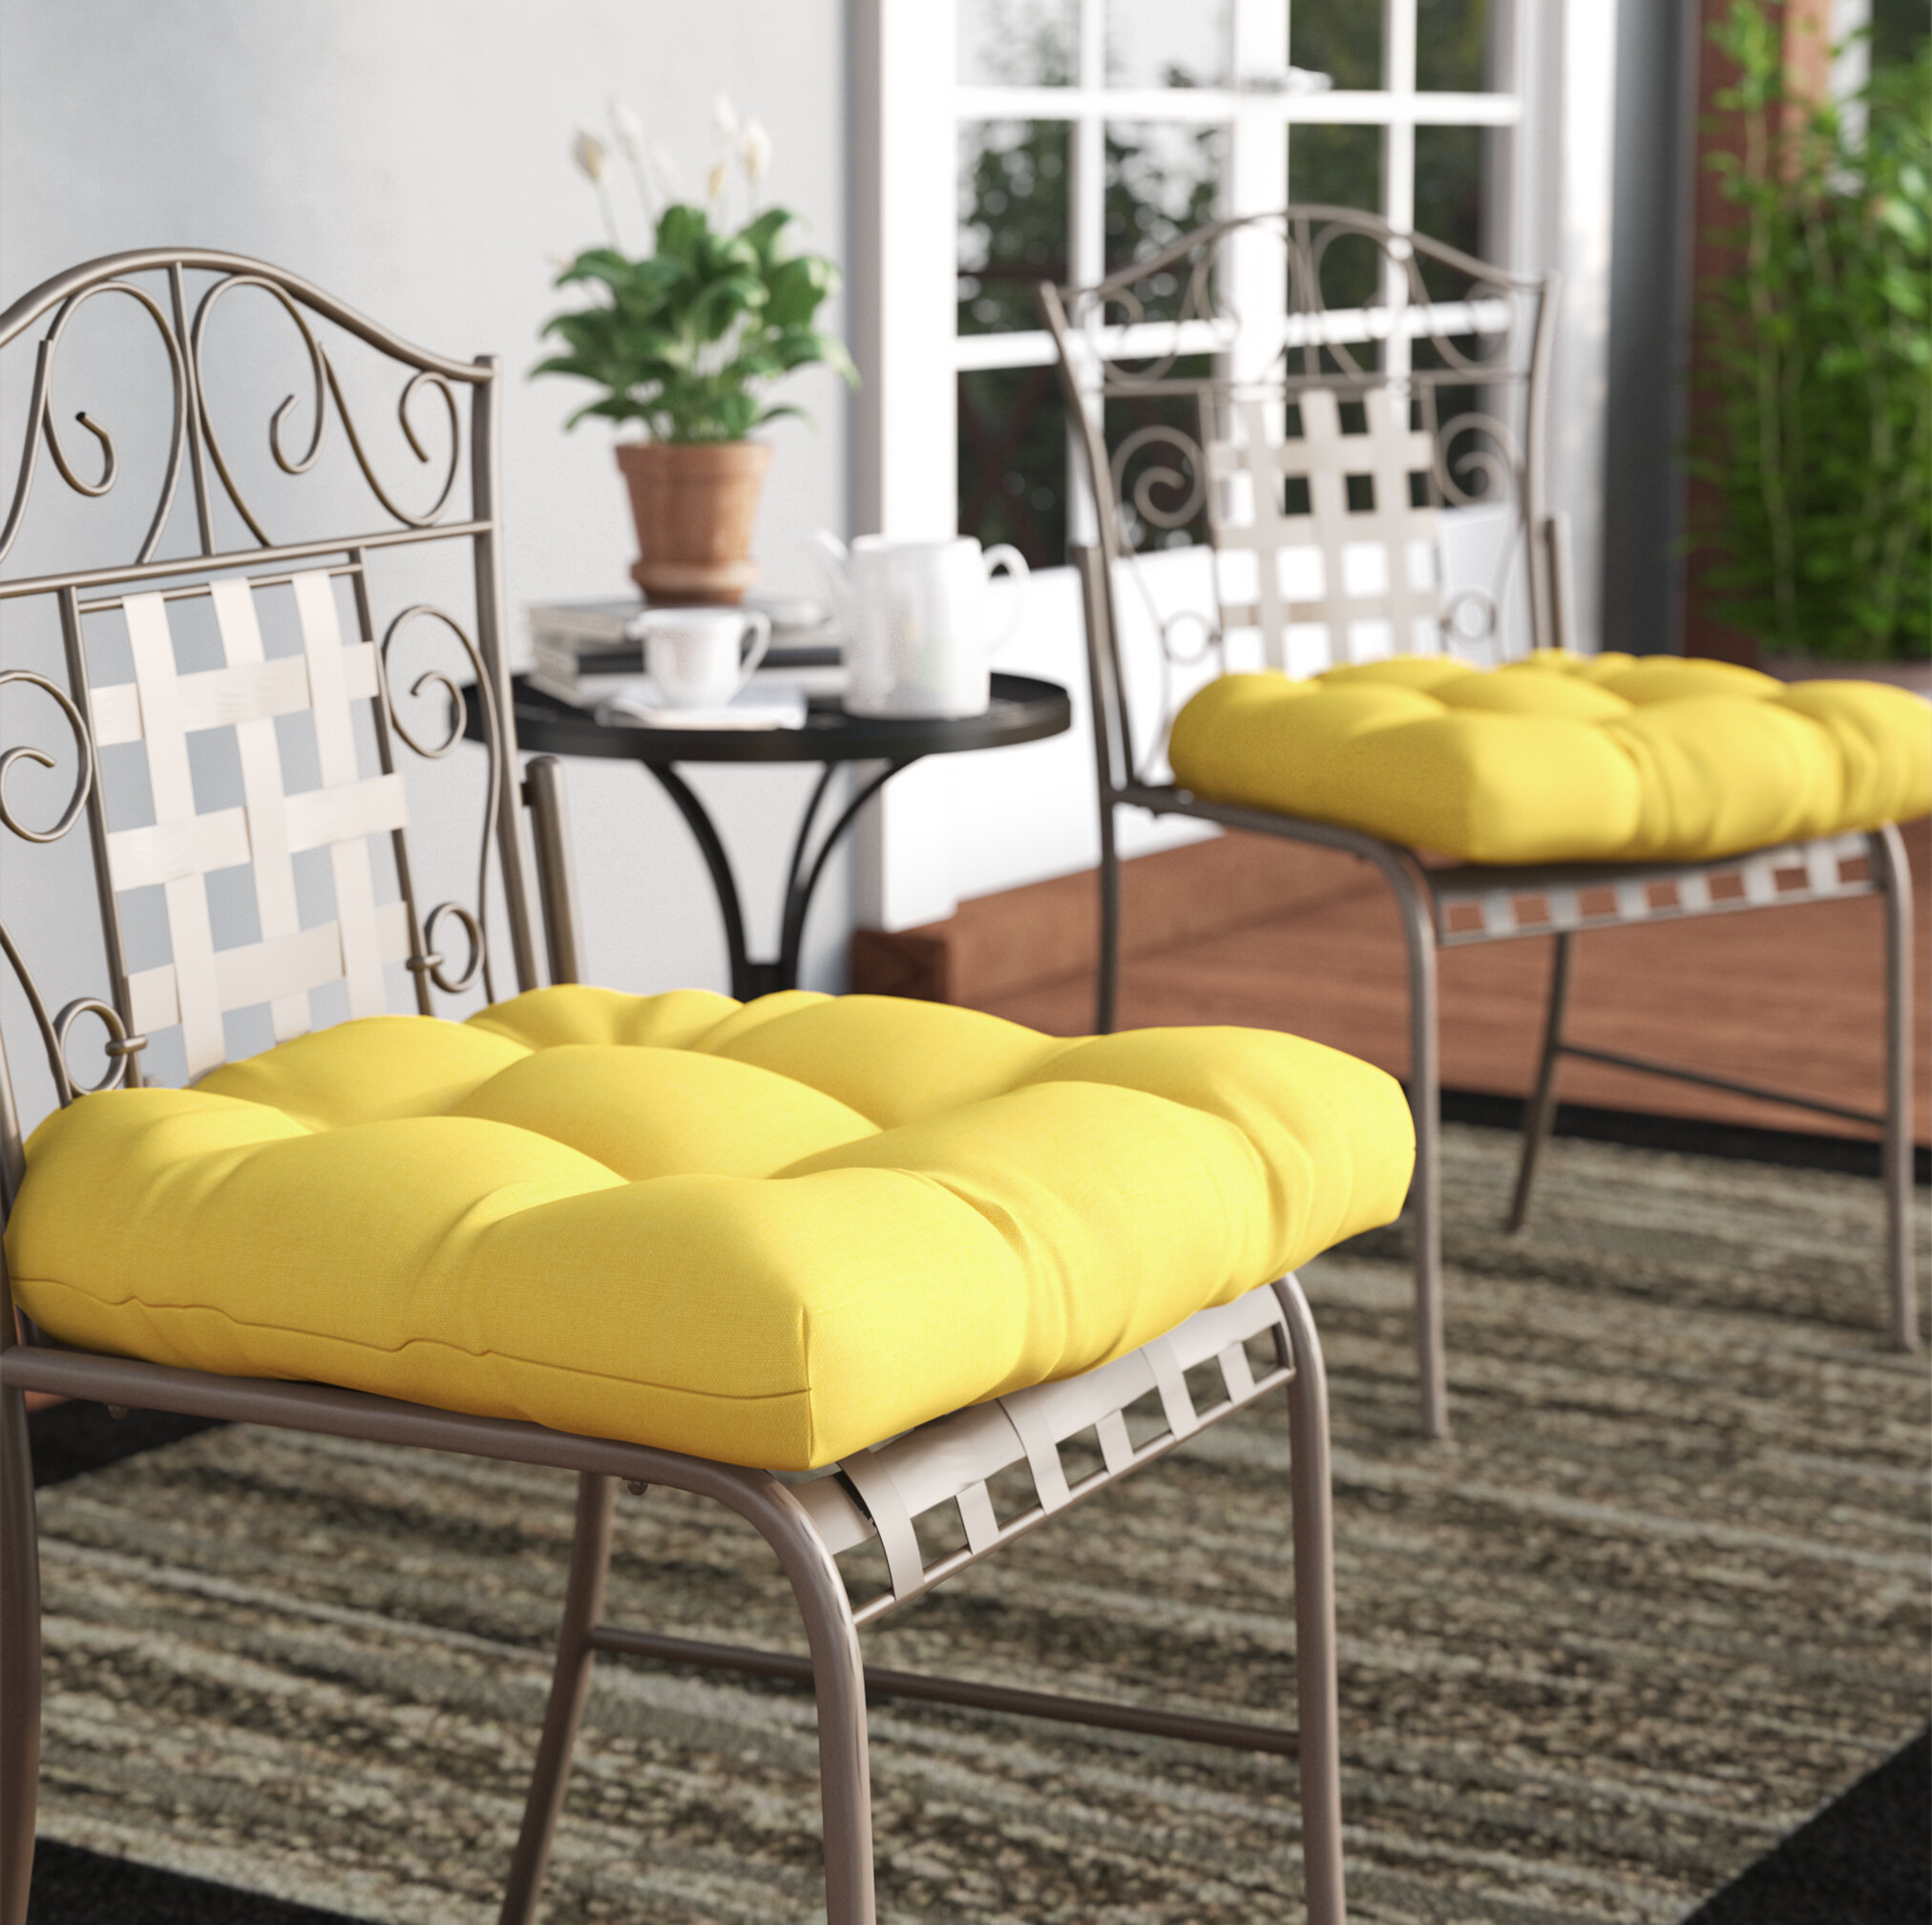 Dining Chair Cushions Yellow / Yellow Dining Chair Cushions Dreamehome